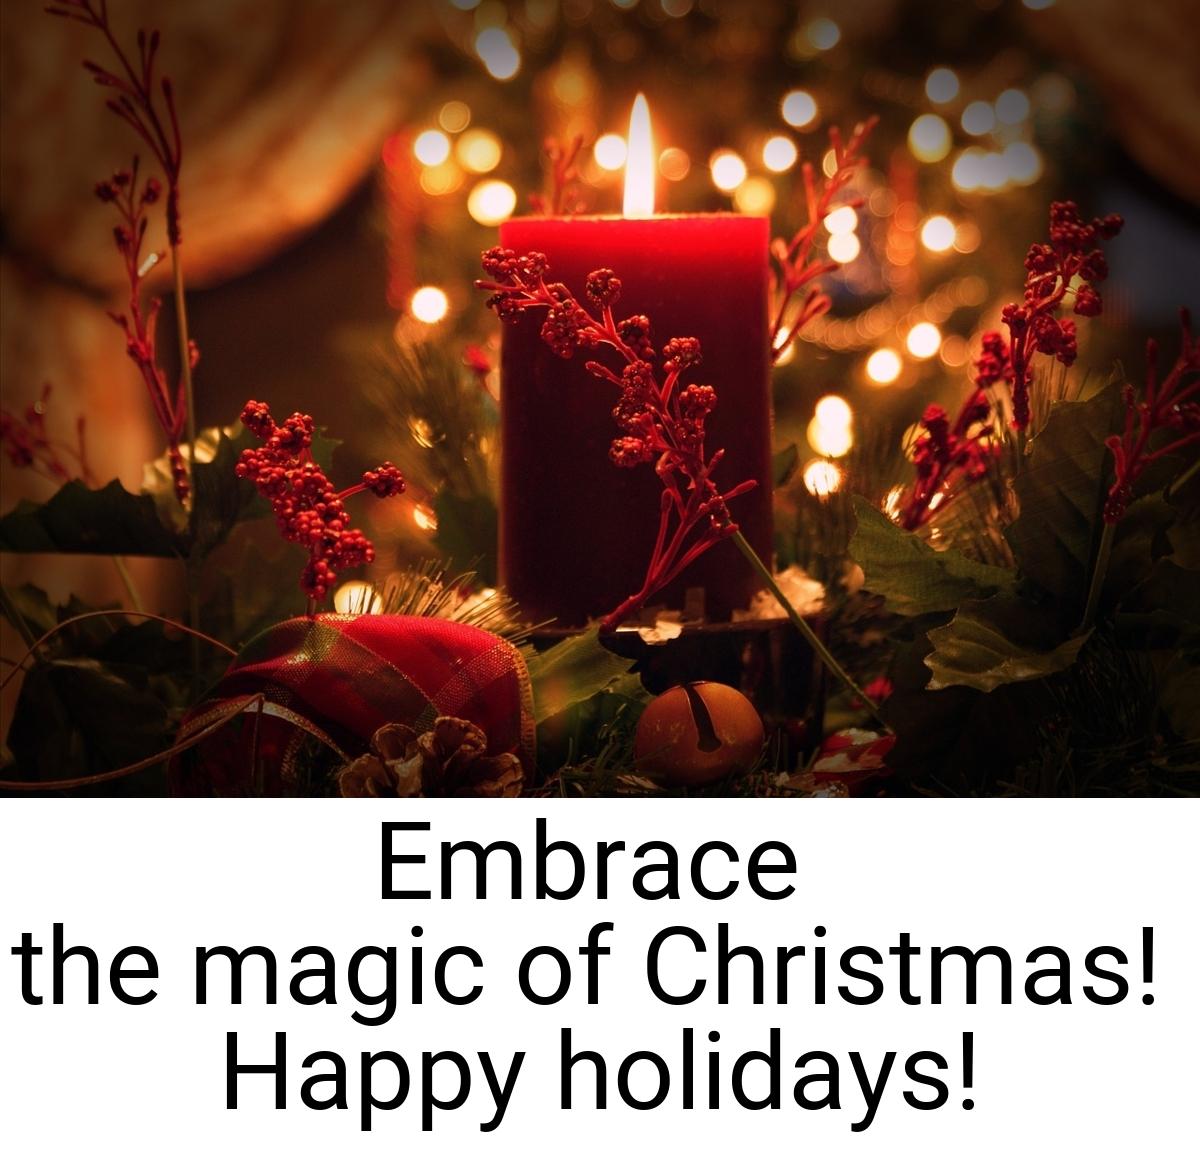 Embrace the magic of Christmas! Happy holidays